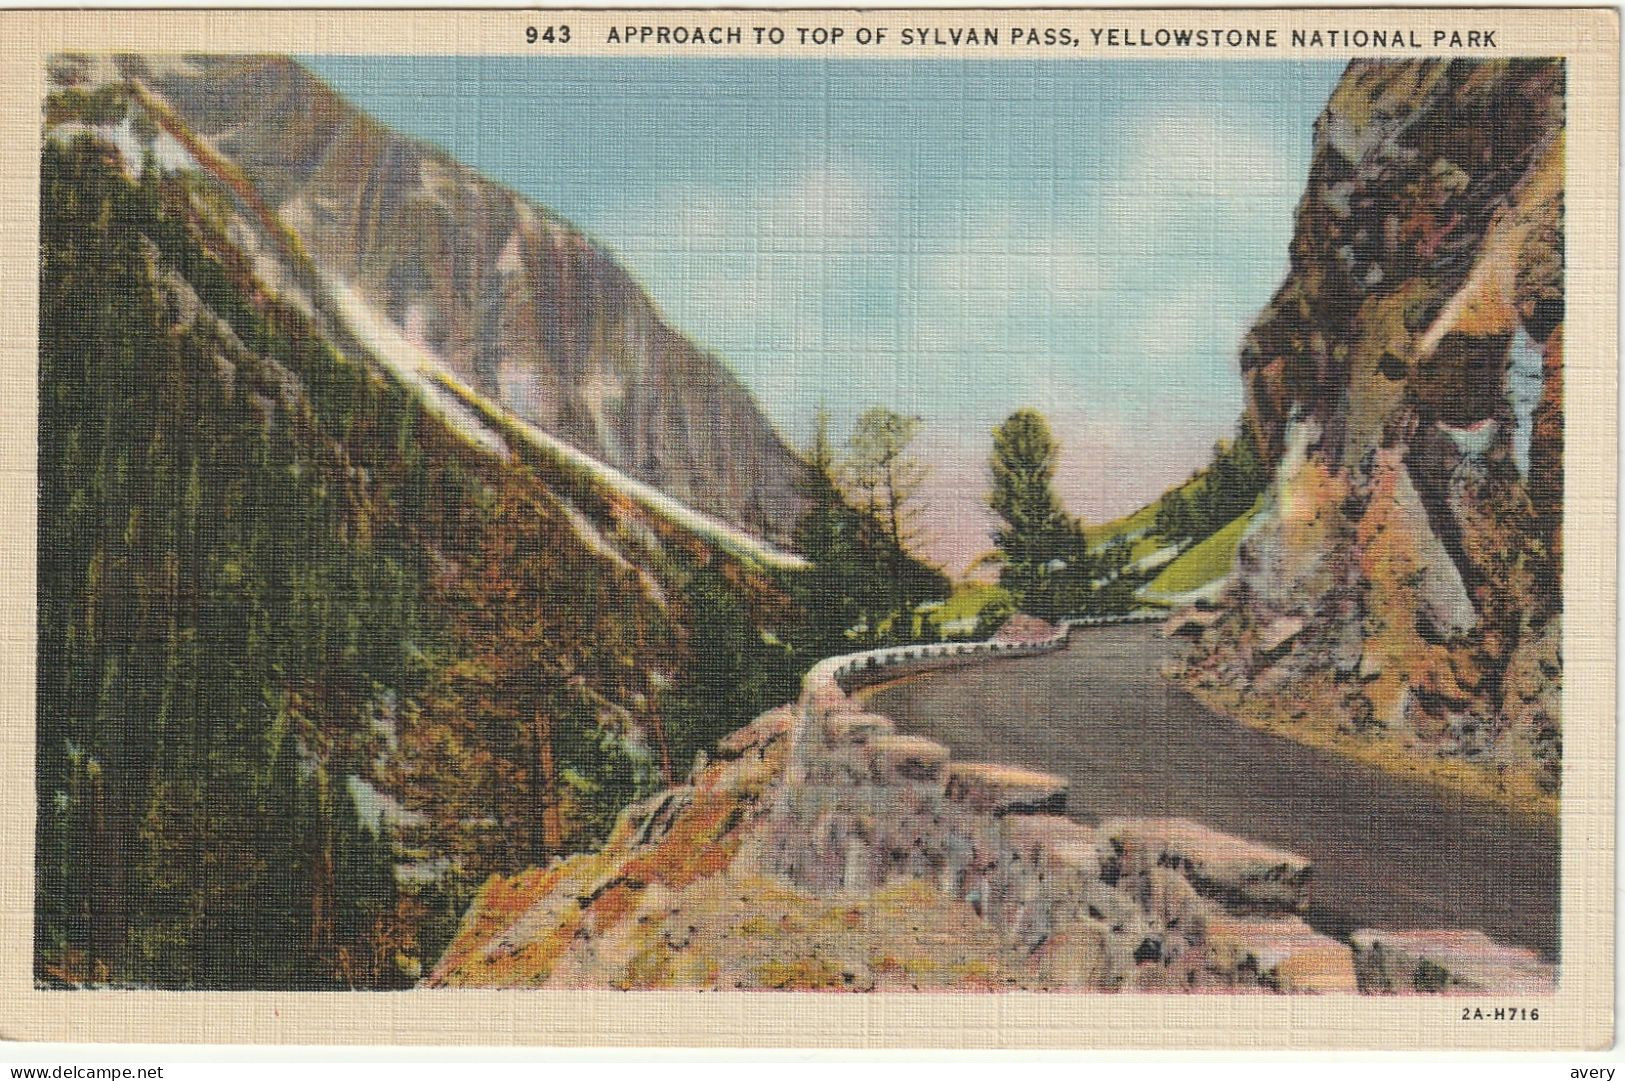 Approach To Top Of Sylvan Pass, Yellowstone National Park, Wyoming - Yellowstone